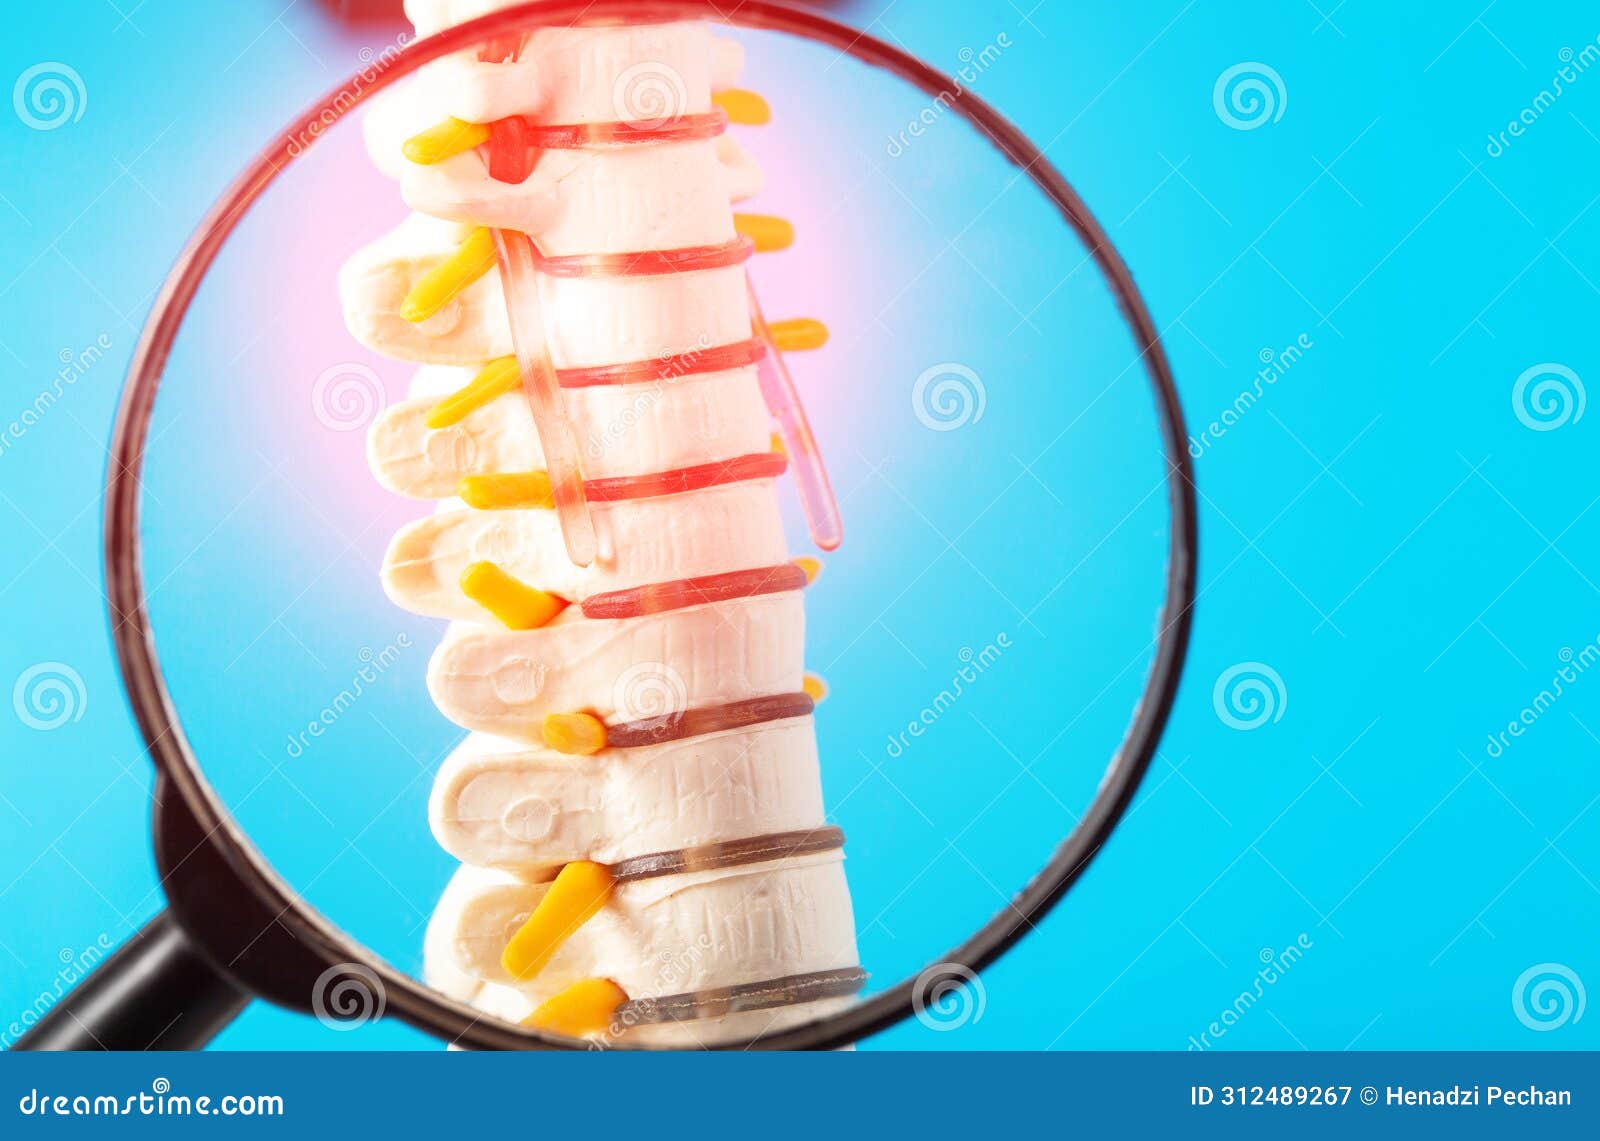 model of the cervical spine with a compressed nerve root on a blue background under a magnifying glass. concept of